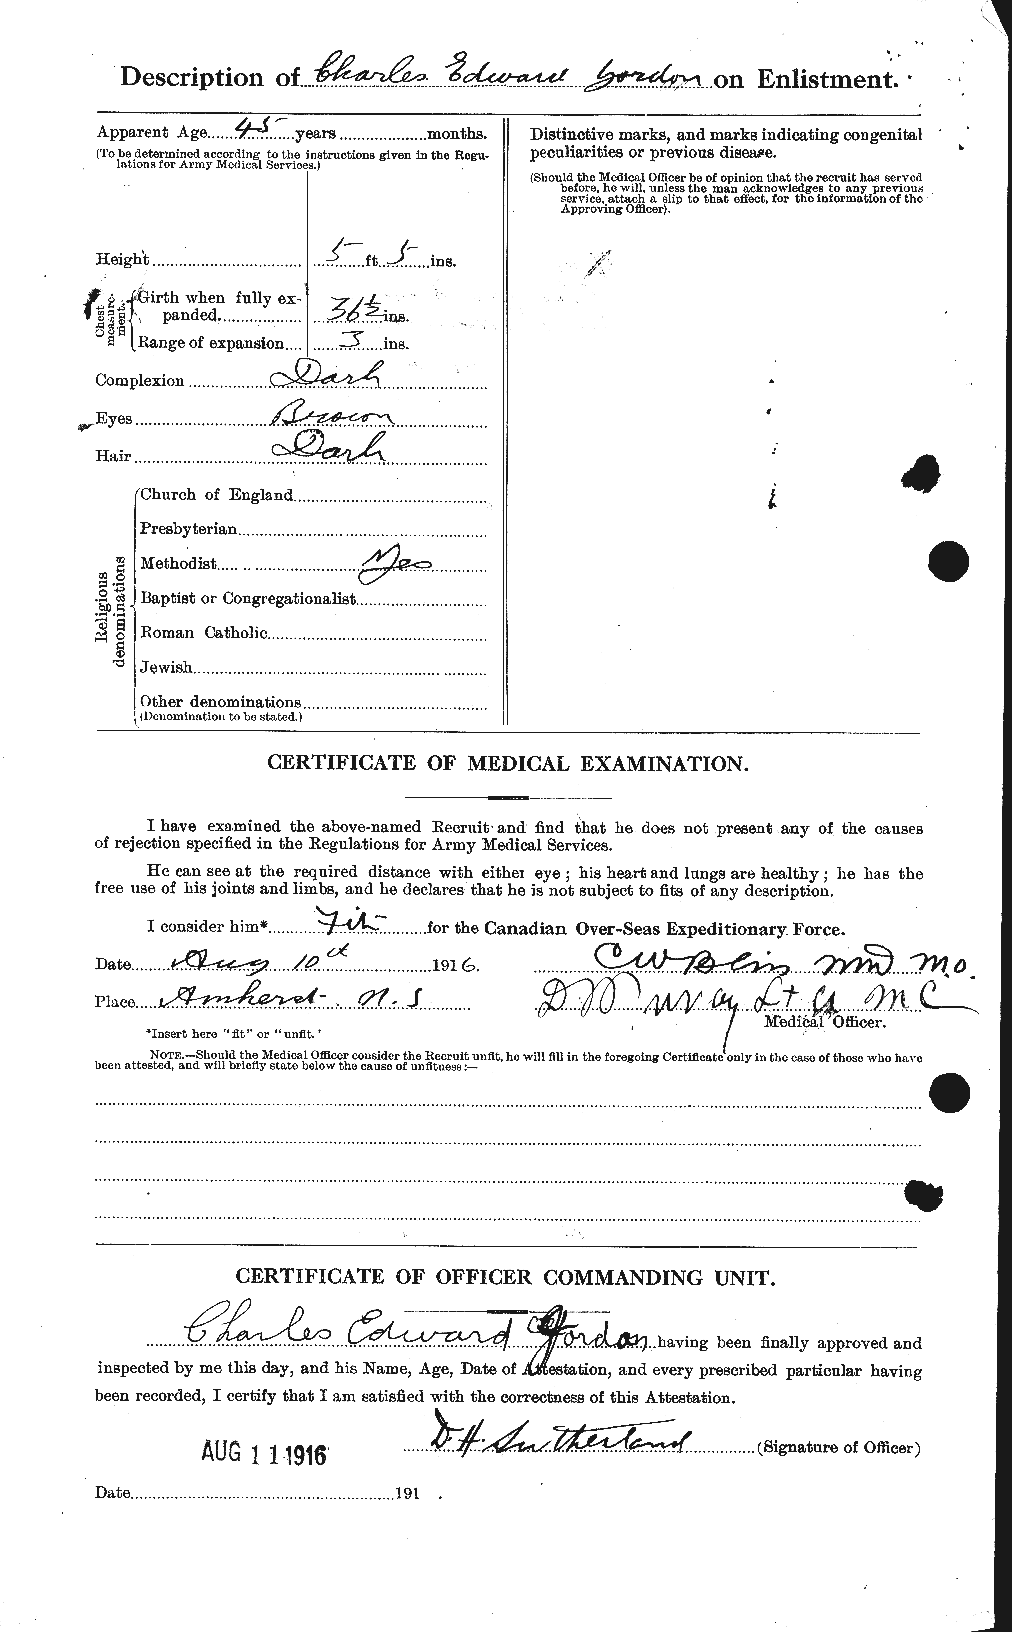 Personnel Records of the First World War - CEF 424265b